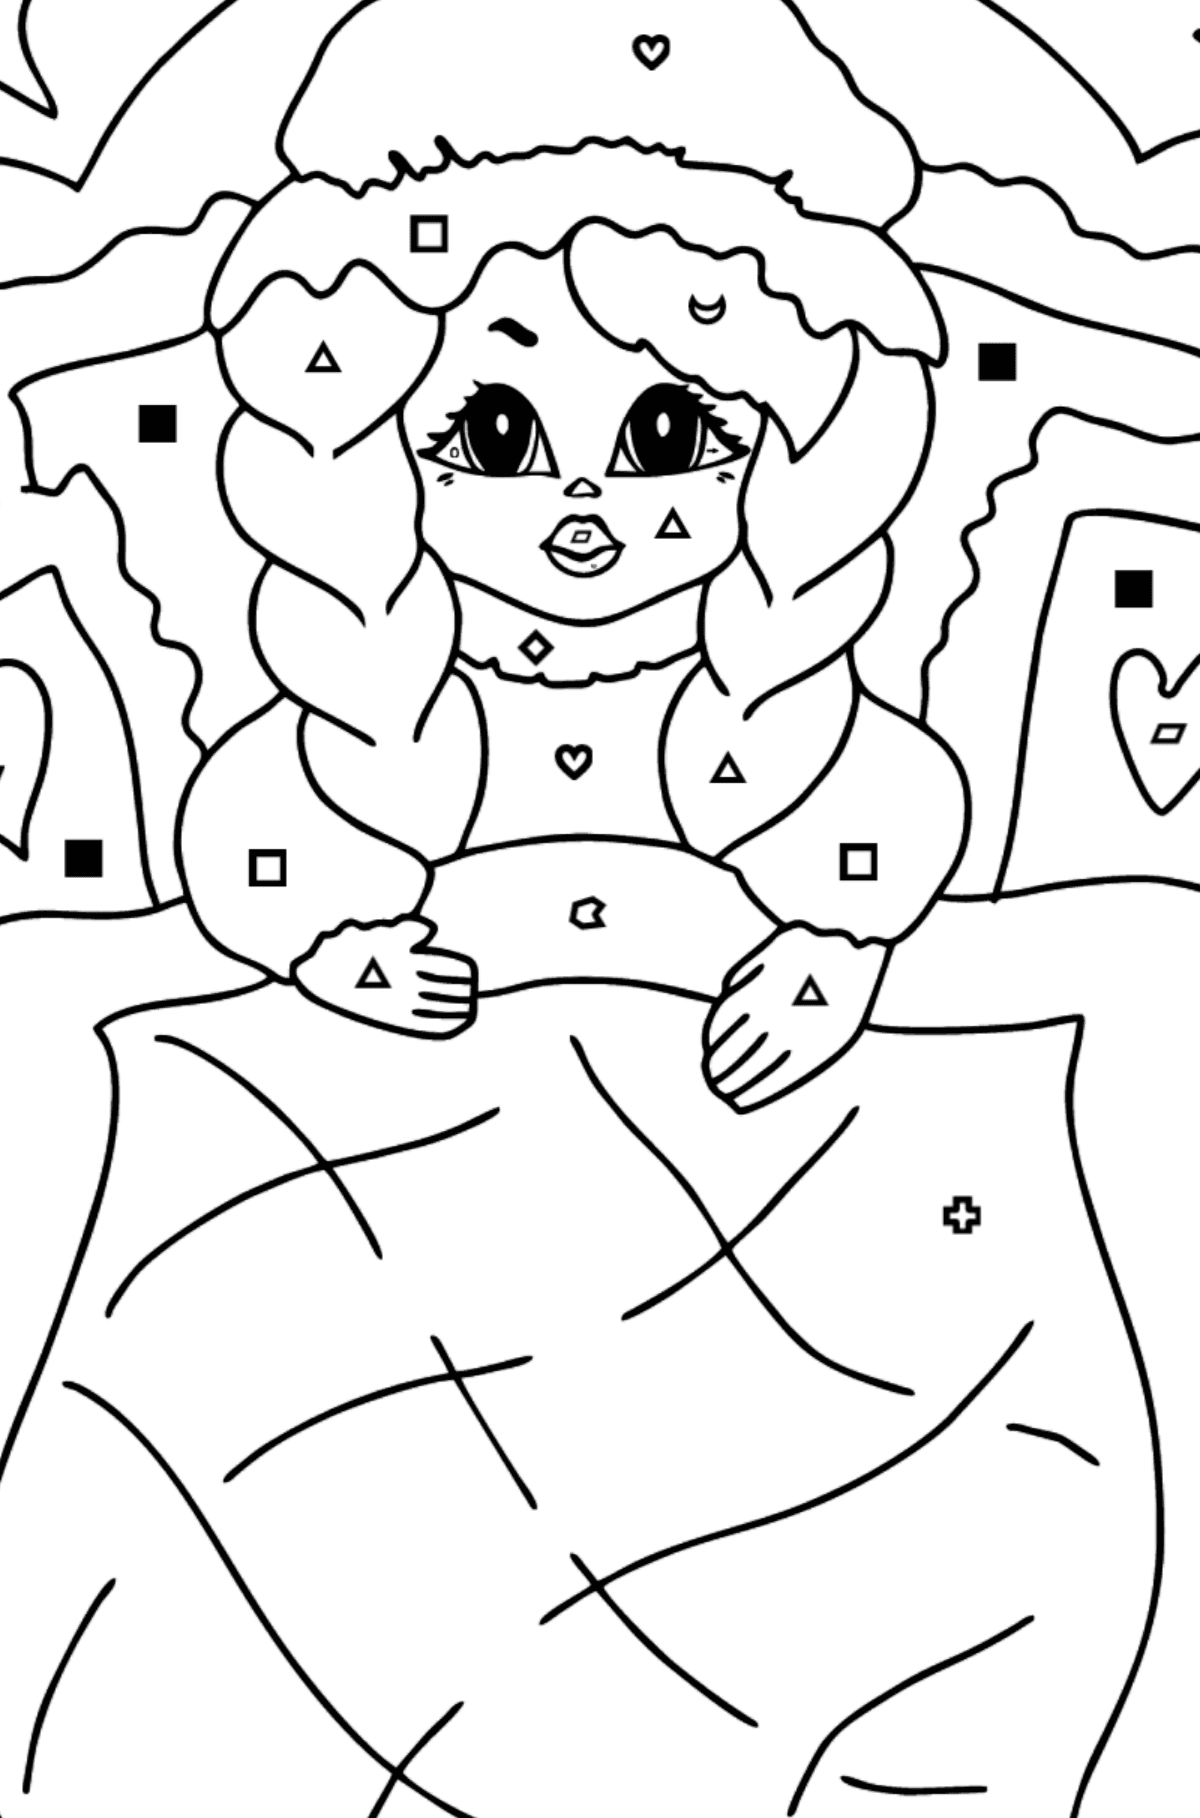 Coloring Page - A Princess in Bed - Coloring by Symbols and Geometric Shapes for Kids